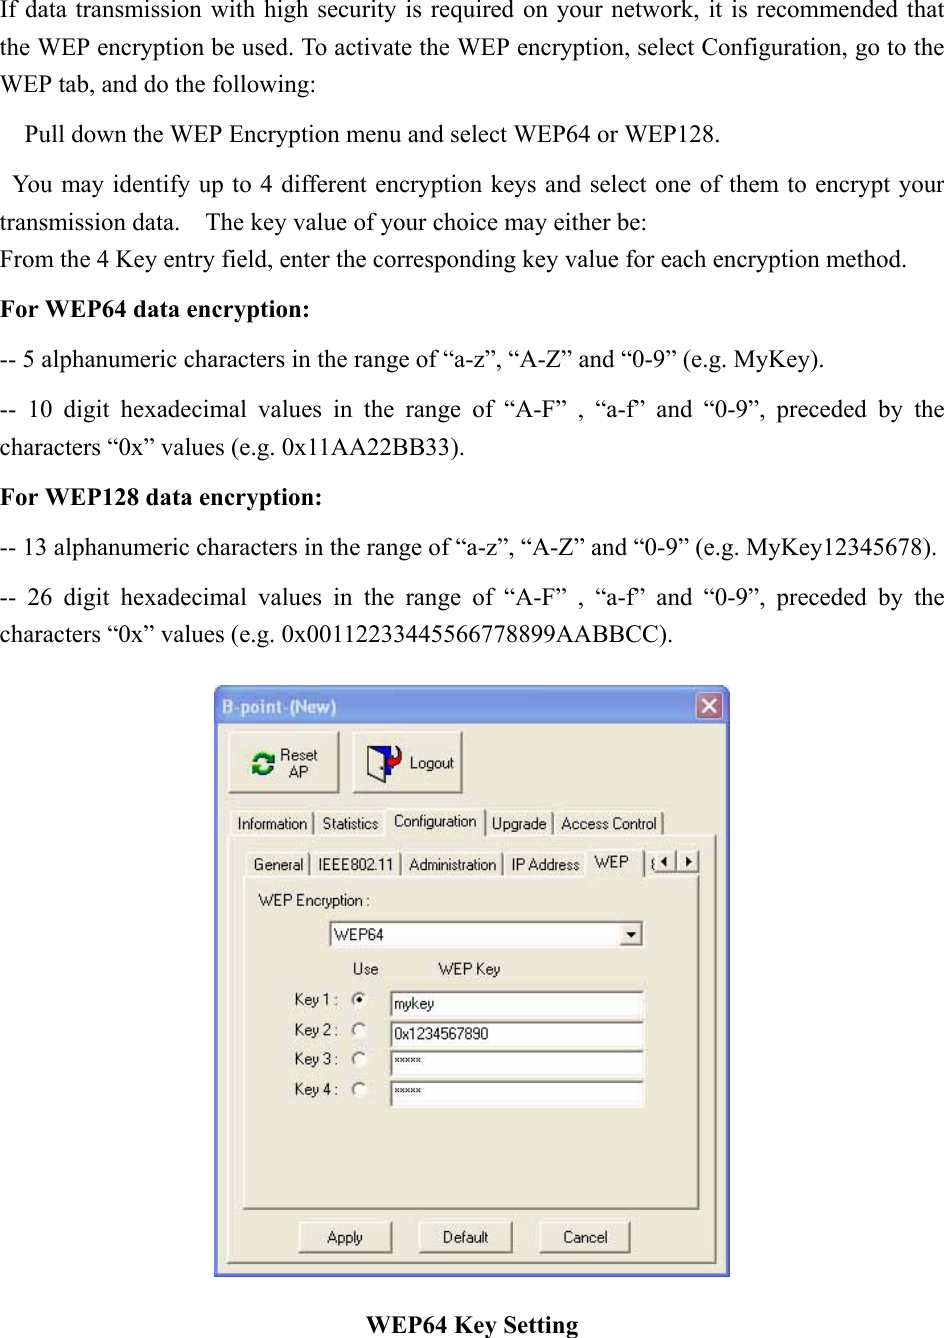 If data transmission with high security is required on your network, it is recommended that the WEP encryption be used. To activate the WEP encryption, select Configuration, go to the WEP tab, and do the following:       Pull down the WEP Encryption menu and select WEP64 or WEP128.     You may identify up to 4 different encryption keys and select one of them to encrypt your transmission data.    The key value of your choice may either be: From the 4 Key entry field, enter the corresponding key value for each encryption method.   For WEP64 data encryption:   -- 5 alphanumeric characters in the range of “a-z”, “A-Z” and “0-9” (e.g. MyKey).   -- 10 digit hexadecimal values in the range of “A-F” , “a-f” and “0-9”, preceded by the characters “0x” values (e.g. 0x11AA22BB33).   For WEP128 data encryption:   -- 13 alphanumeric characters in the range of “a-z”, “A-Z” and “0-9” (e.g. MyKey12345678).   -- 26 digit hexadecimal values in the range of “A-F” , “a-f” and “0-9”, preceded by the characters “0x” values (e.g. 0x00112233445566778899AABBCC).    WEP64 Key Setting 